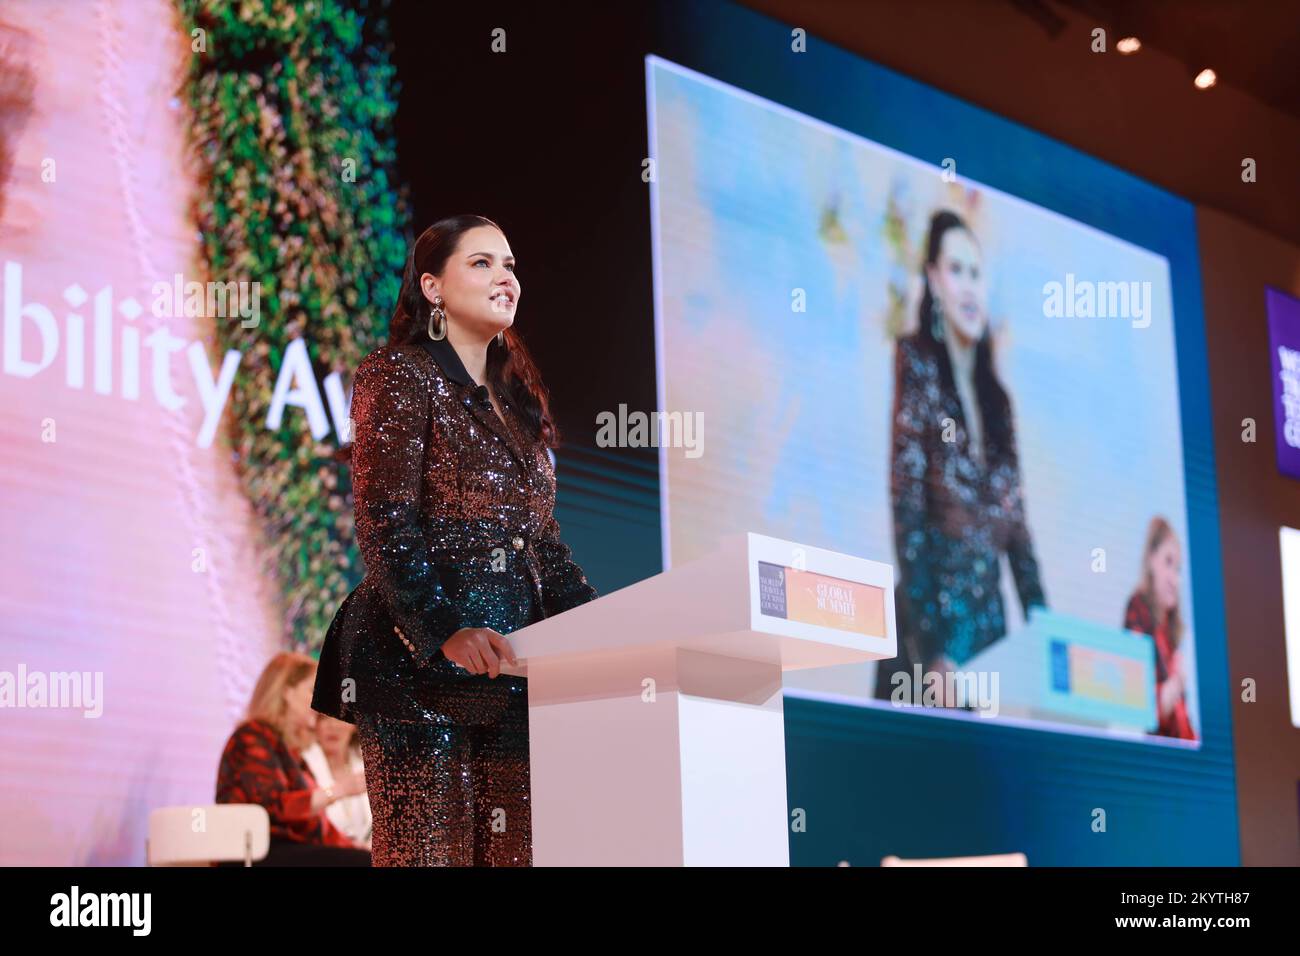 Riyadh, Saudi Arabia. 01st Dec, 2022. Adriana Lima at World Tourism Summit held in Riyadh. Host of the World Travel and Tourism Council (WTTC) World Summit, Saudi Arabia has pulled off the biggest event in its history, breaking all records and drawing more international business leaders and foreign government delegations than ever before. 2,500 participants traveled to Riyadh to attend the “Travel for a better future” summit. Friday December 2, 2022 POOL/AVORY CELEBRITY ACCESS/Cordon Press Credit: CORDON PRESS/Alamy Live News Stock Photo